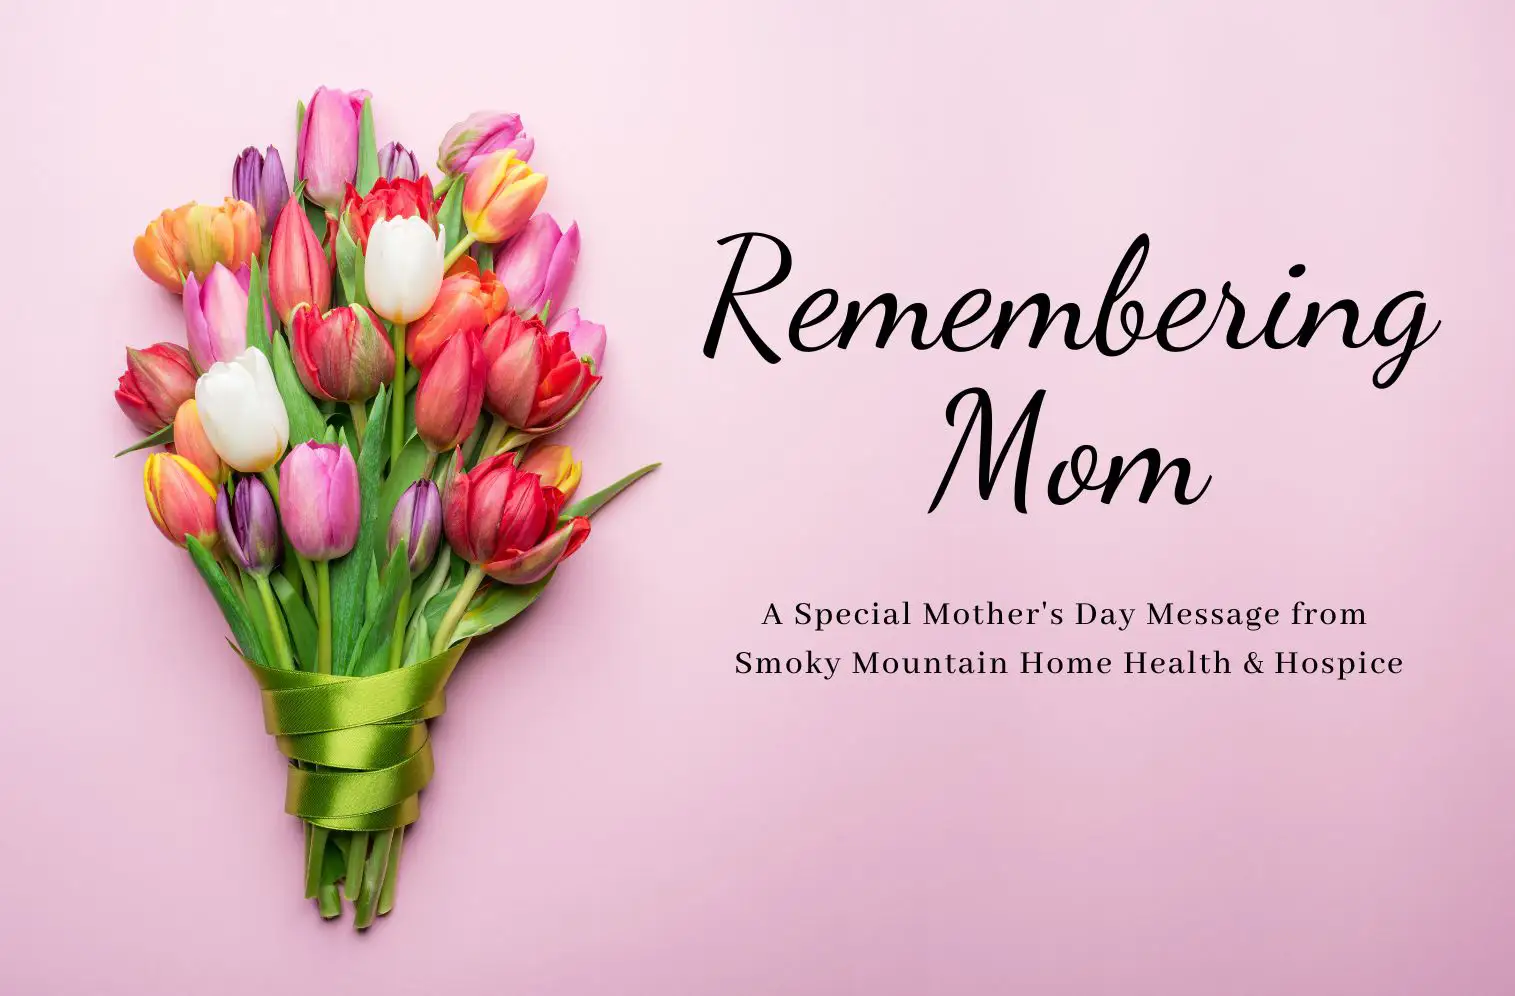 Remembering mom on Mother's Day